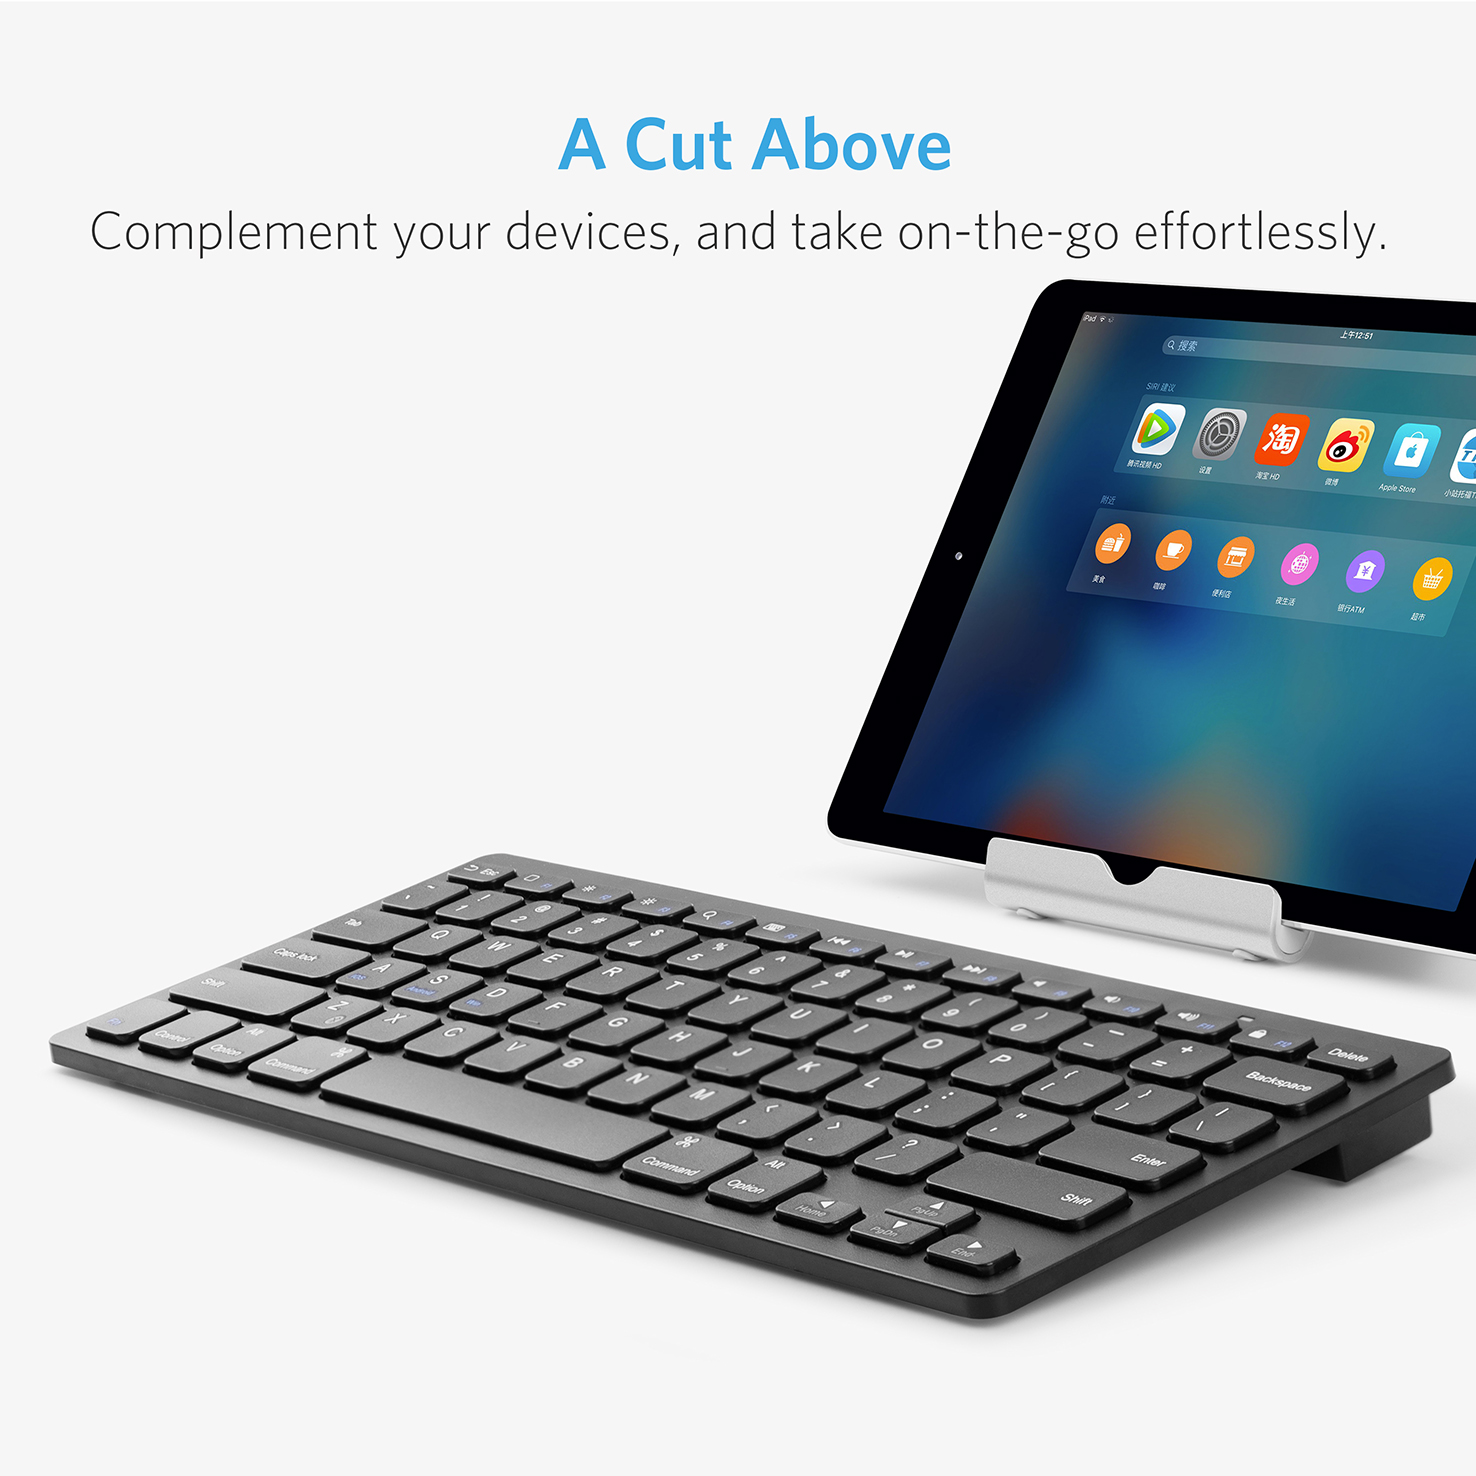 Anker Bluetooth Ultra-Slim Keyboard for iPad, Galaxy Tabs and Other Mobile Devices, Black - image 2 of 6